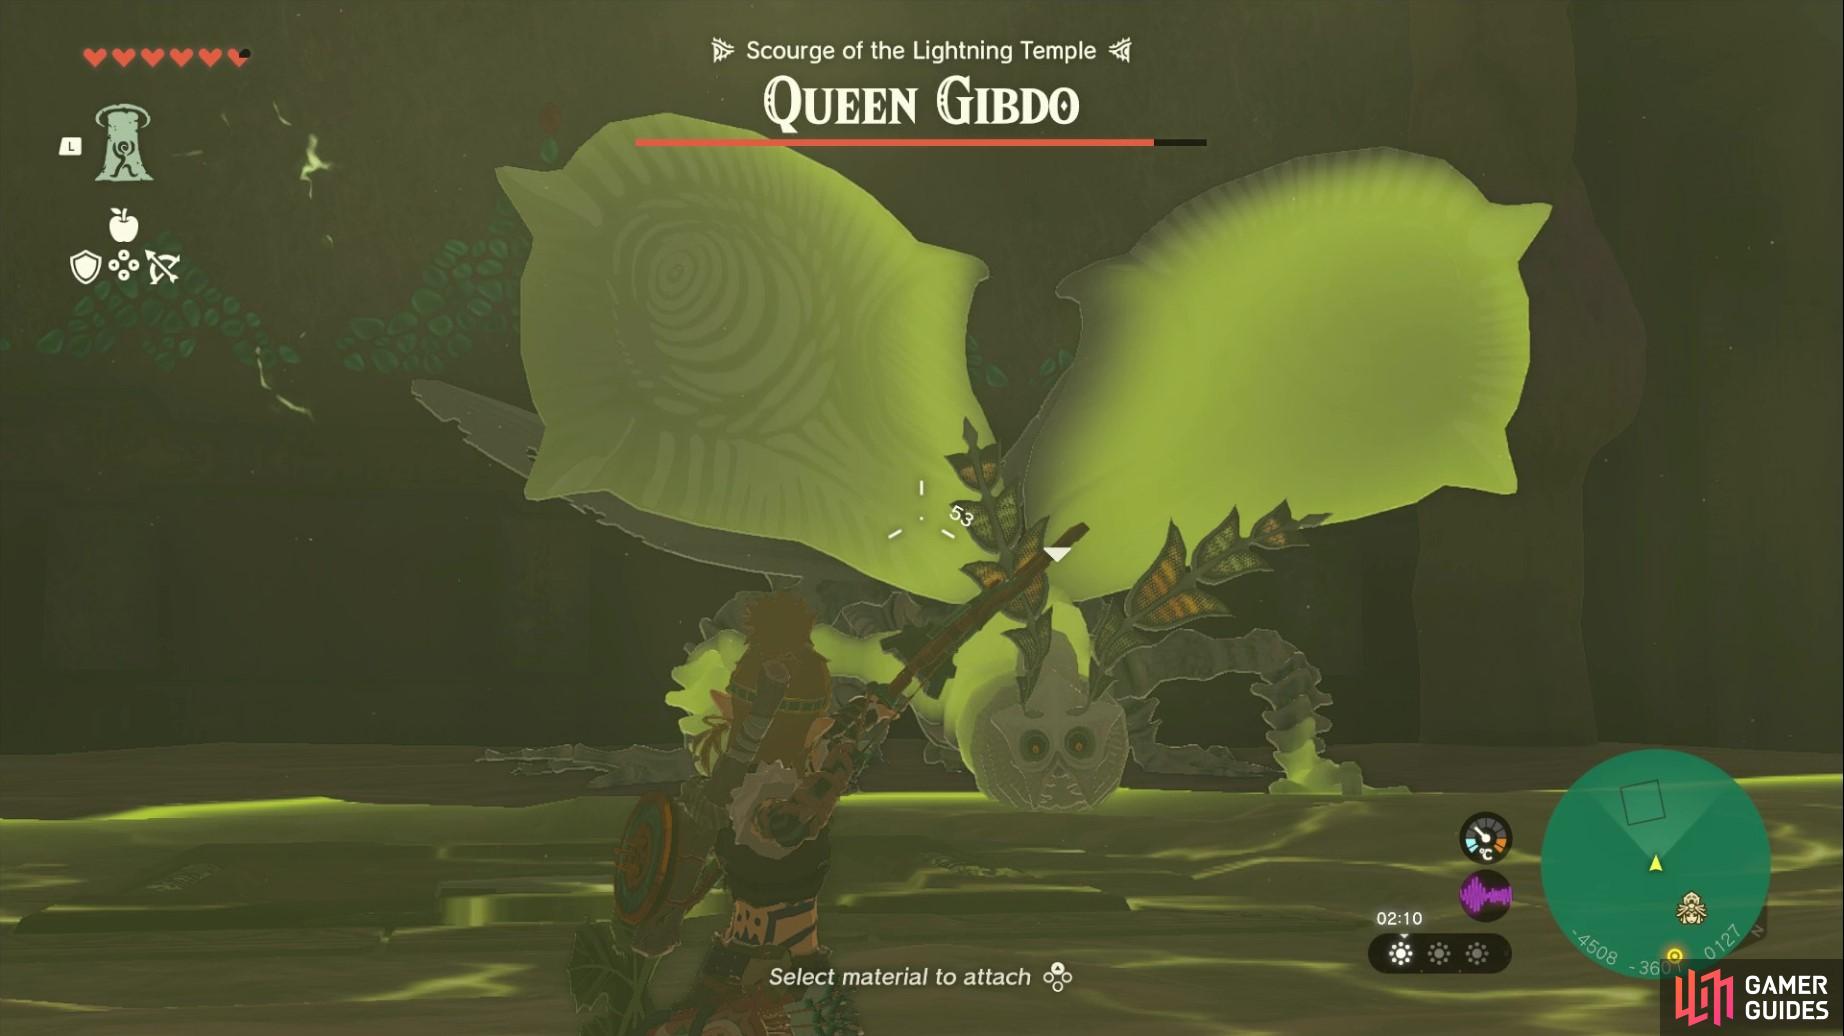 and try to lure !Queen Gibdo into the Lightning area. 